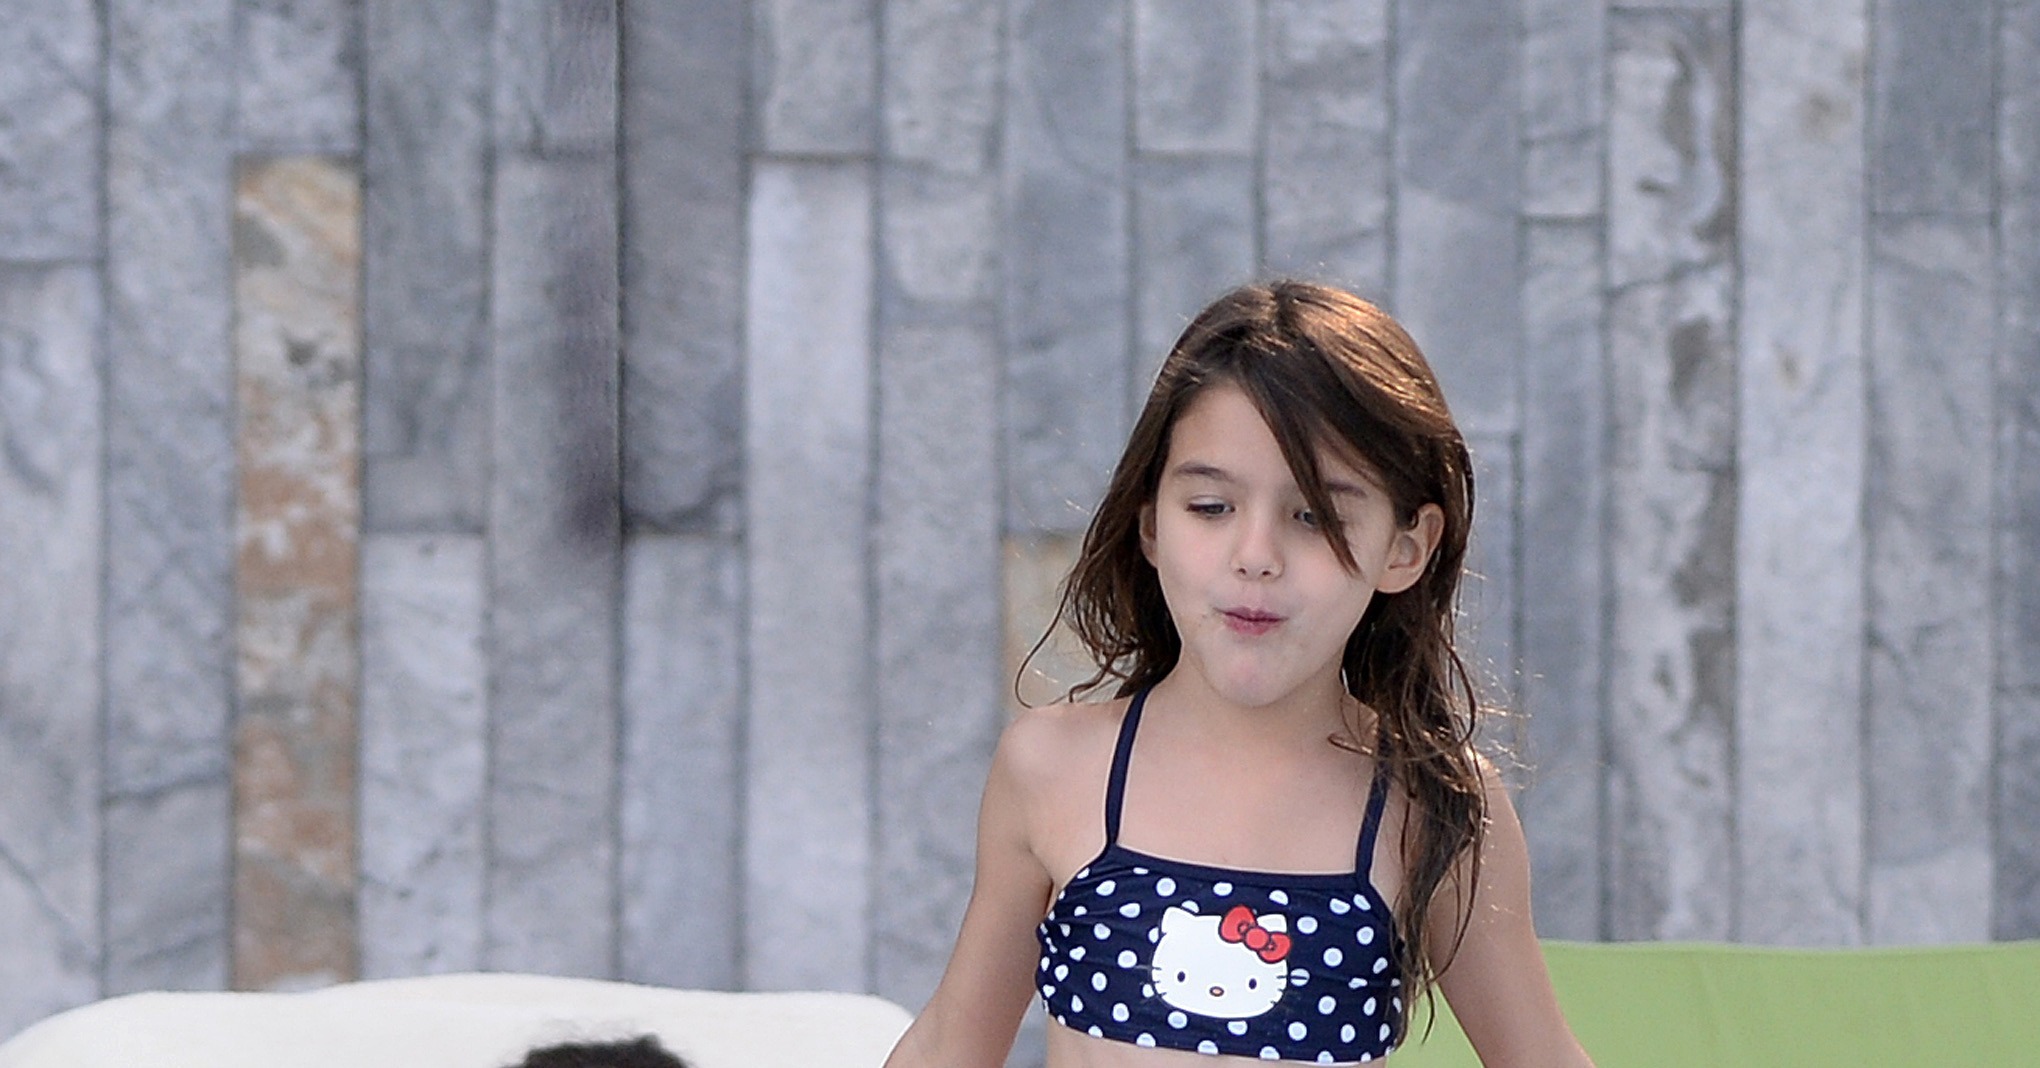 Katie Holmes And Suri Cruise Hit The Pool In Miami Ahead Of The New Katie And Suri Keep The